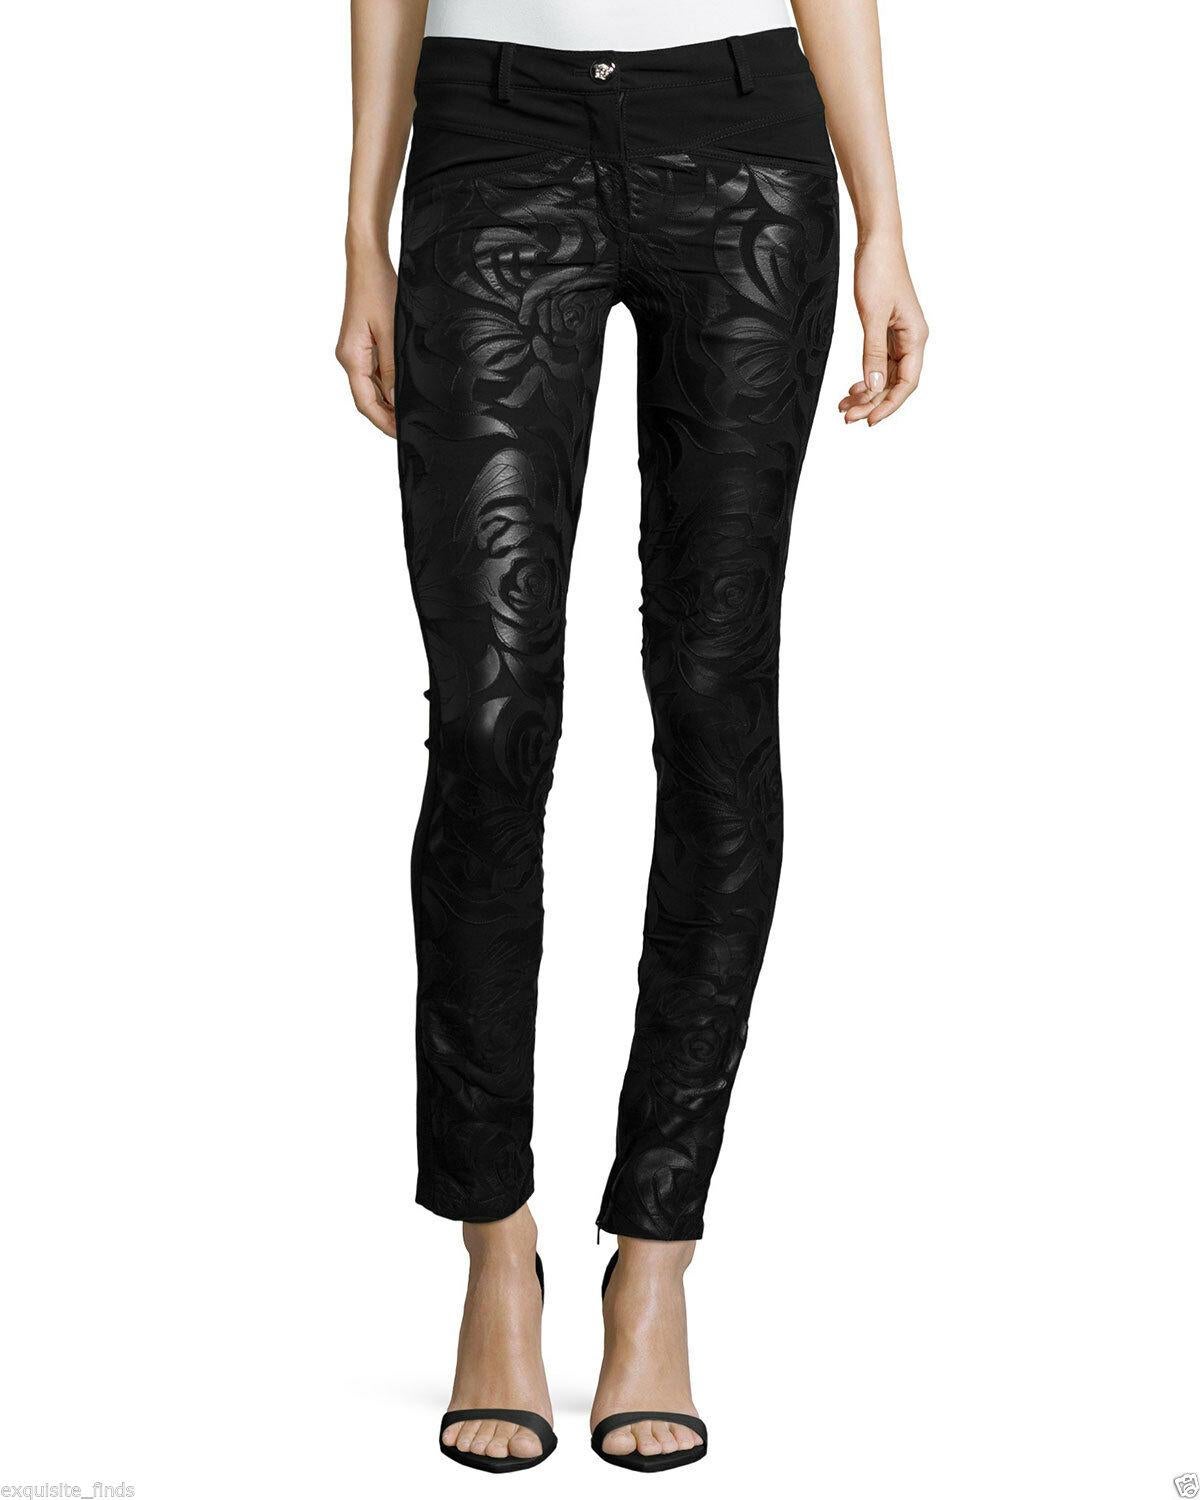 VERSACE

Versace skinny pants 

Front: Leather floral applique on 100% chiffon silk (semi-sheer)

Back:  85% viscose, 9% nylon, 6% elastane

Back patch pockets.

Inside ankle zip.

Button/zip fly; belt loops.

Made in Italy.

 IT Size 38 - US